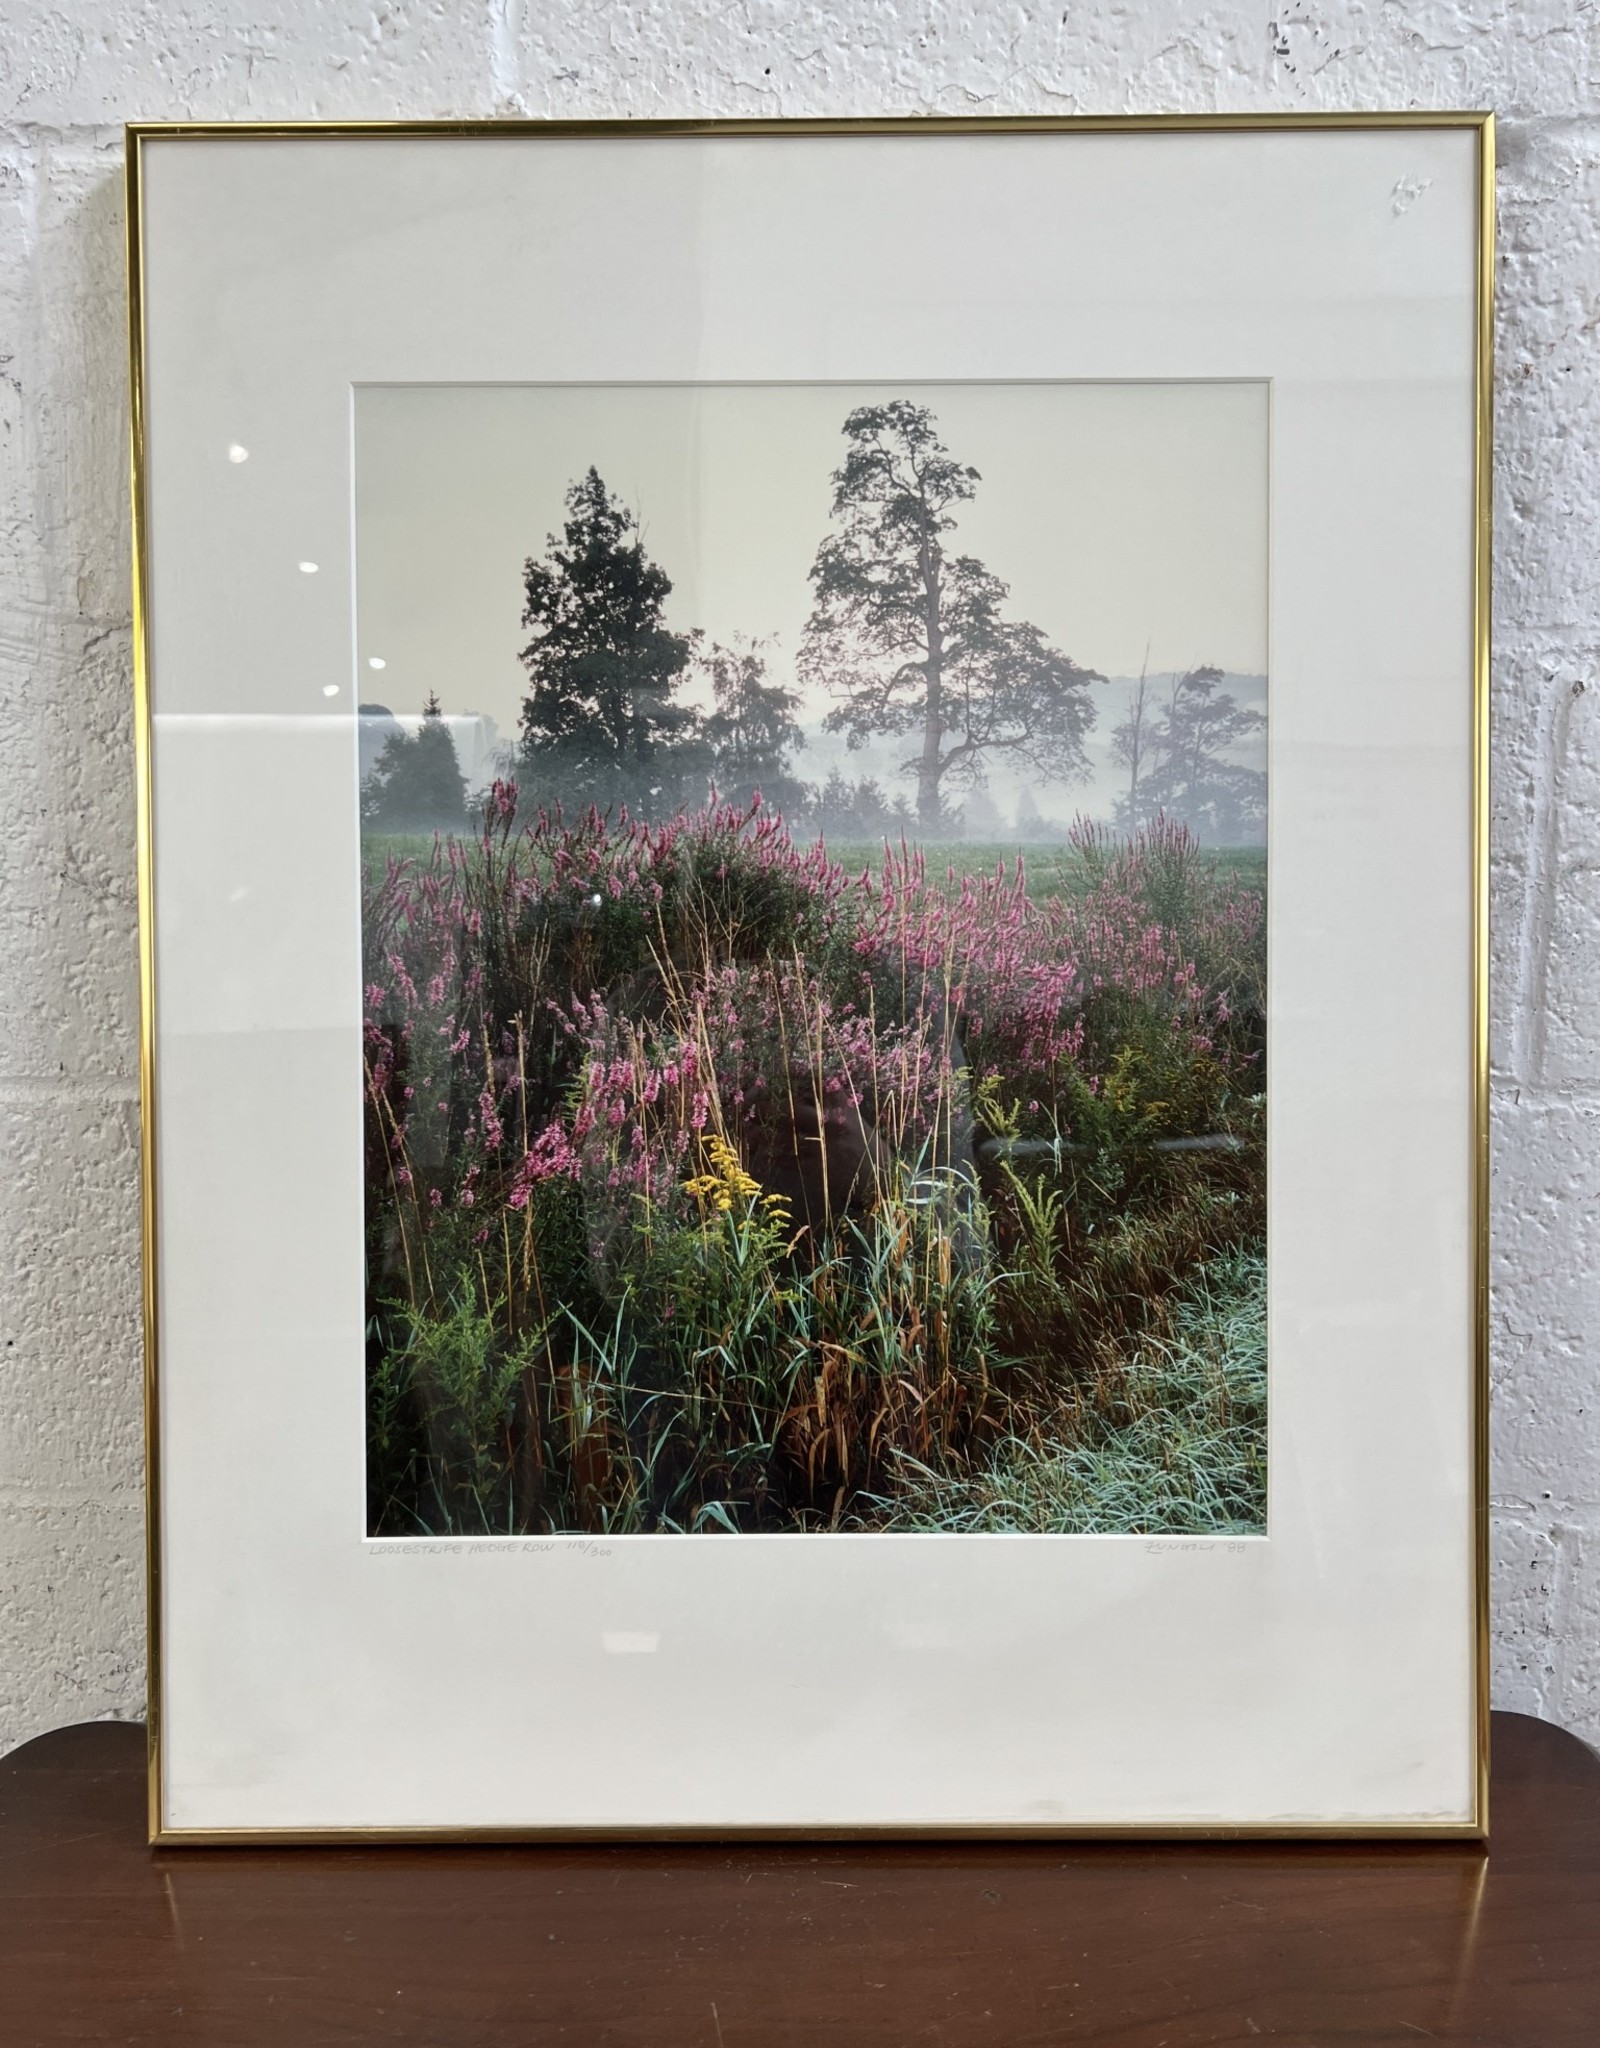 Loosestrife Hedge Row, framed photograph, sgnd Zungoli